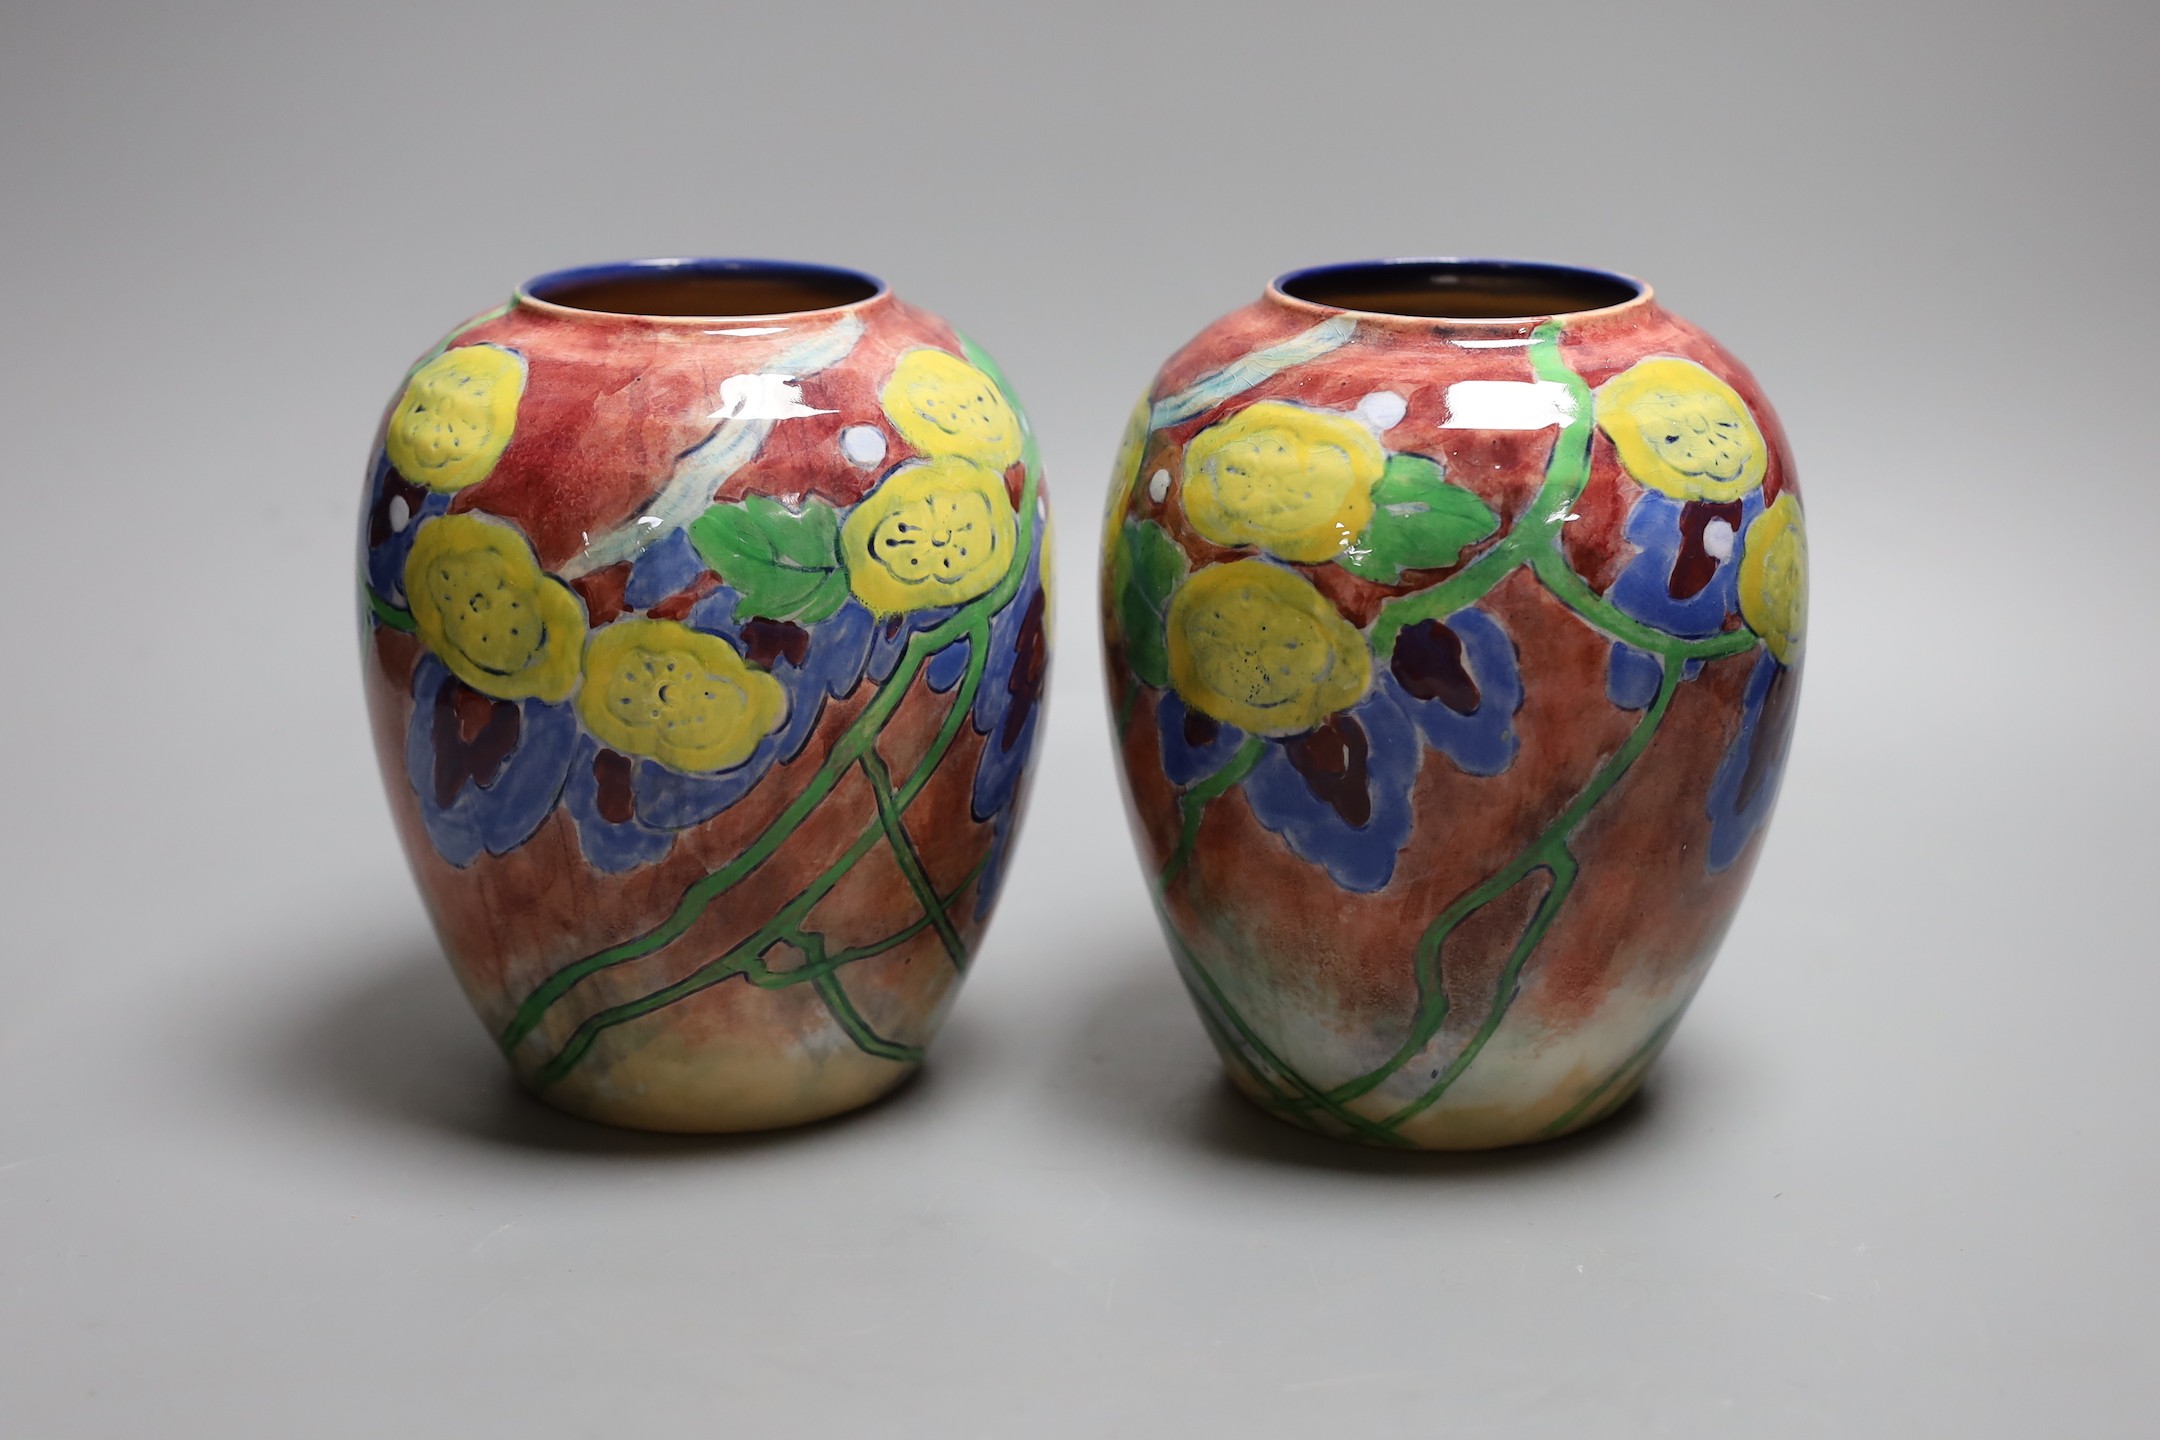 A pair of Royal Doulton floral vases by Frank Brangwyn D5162 c.1931